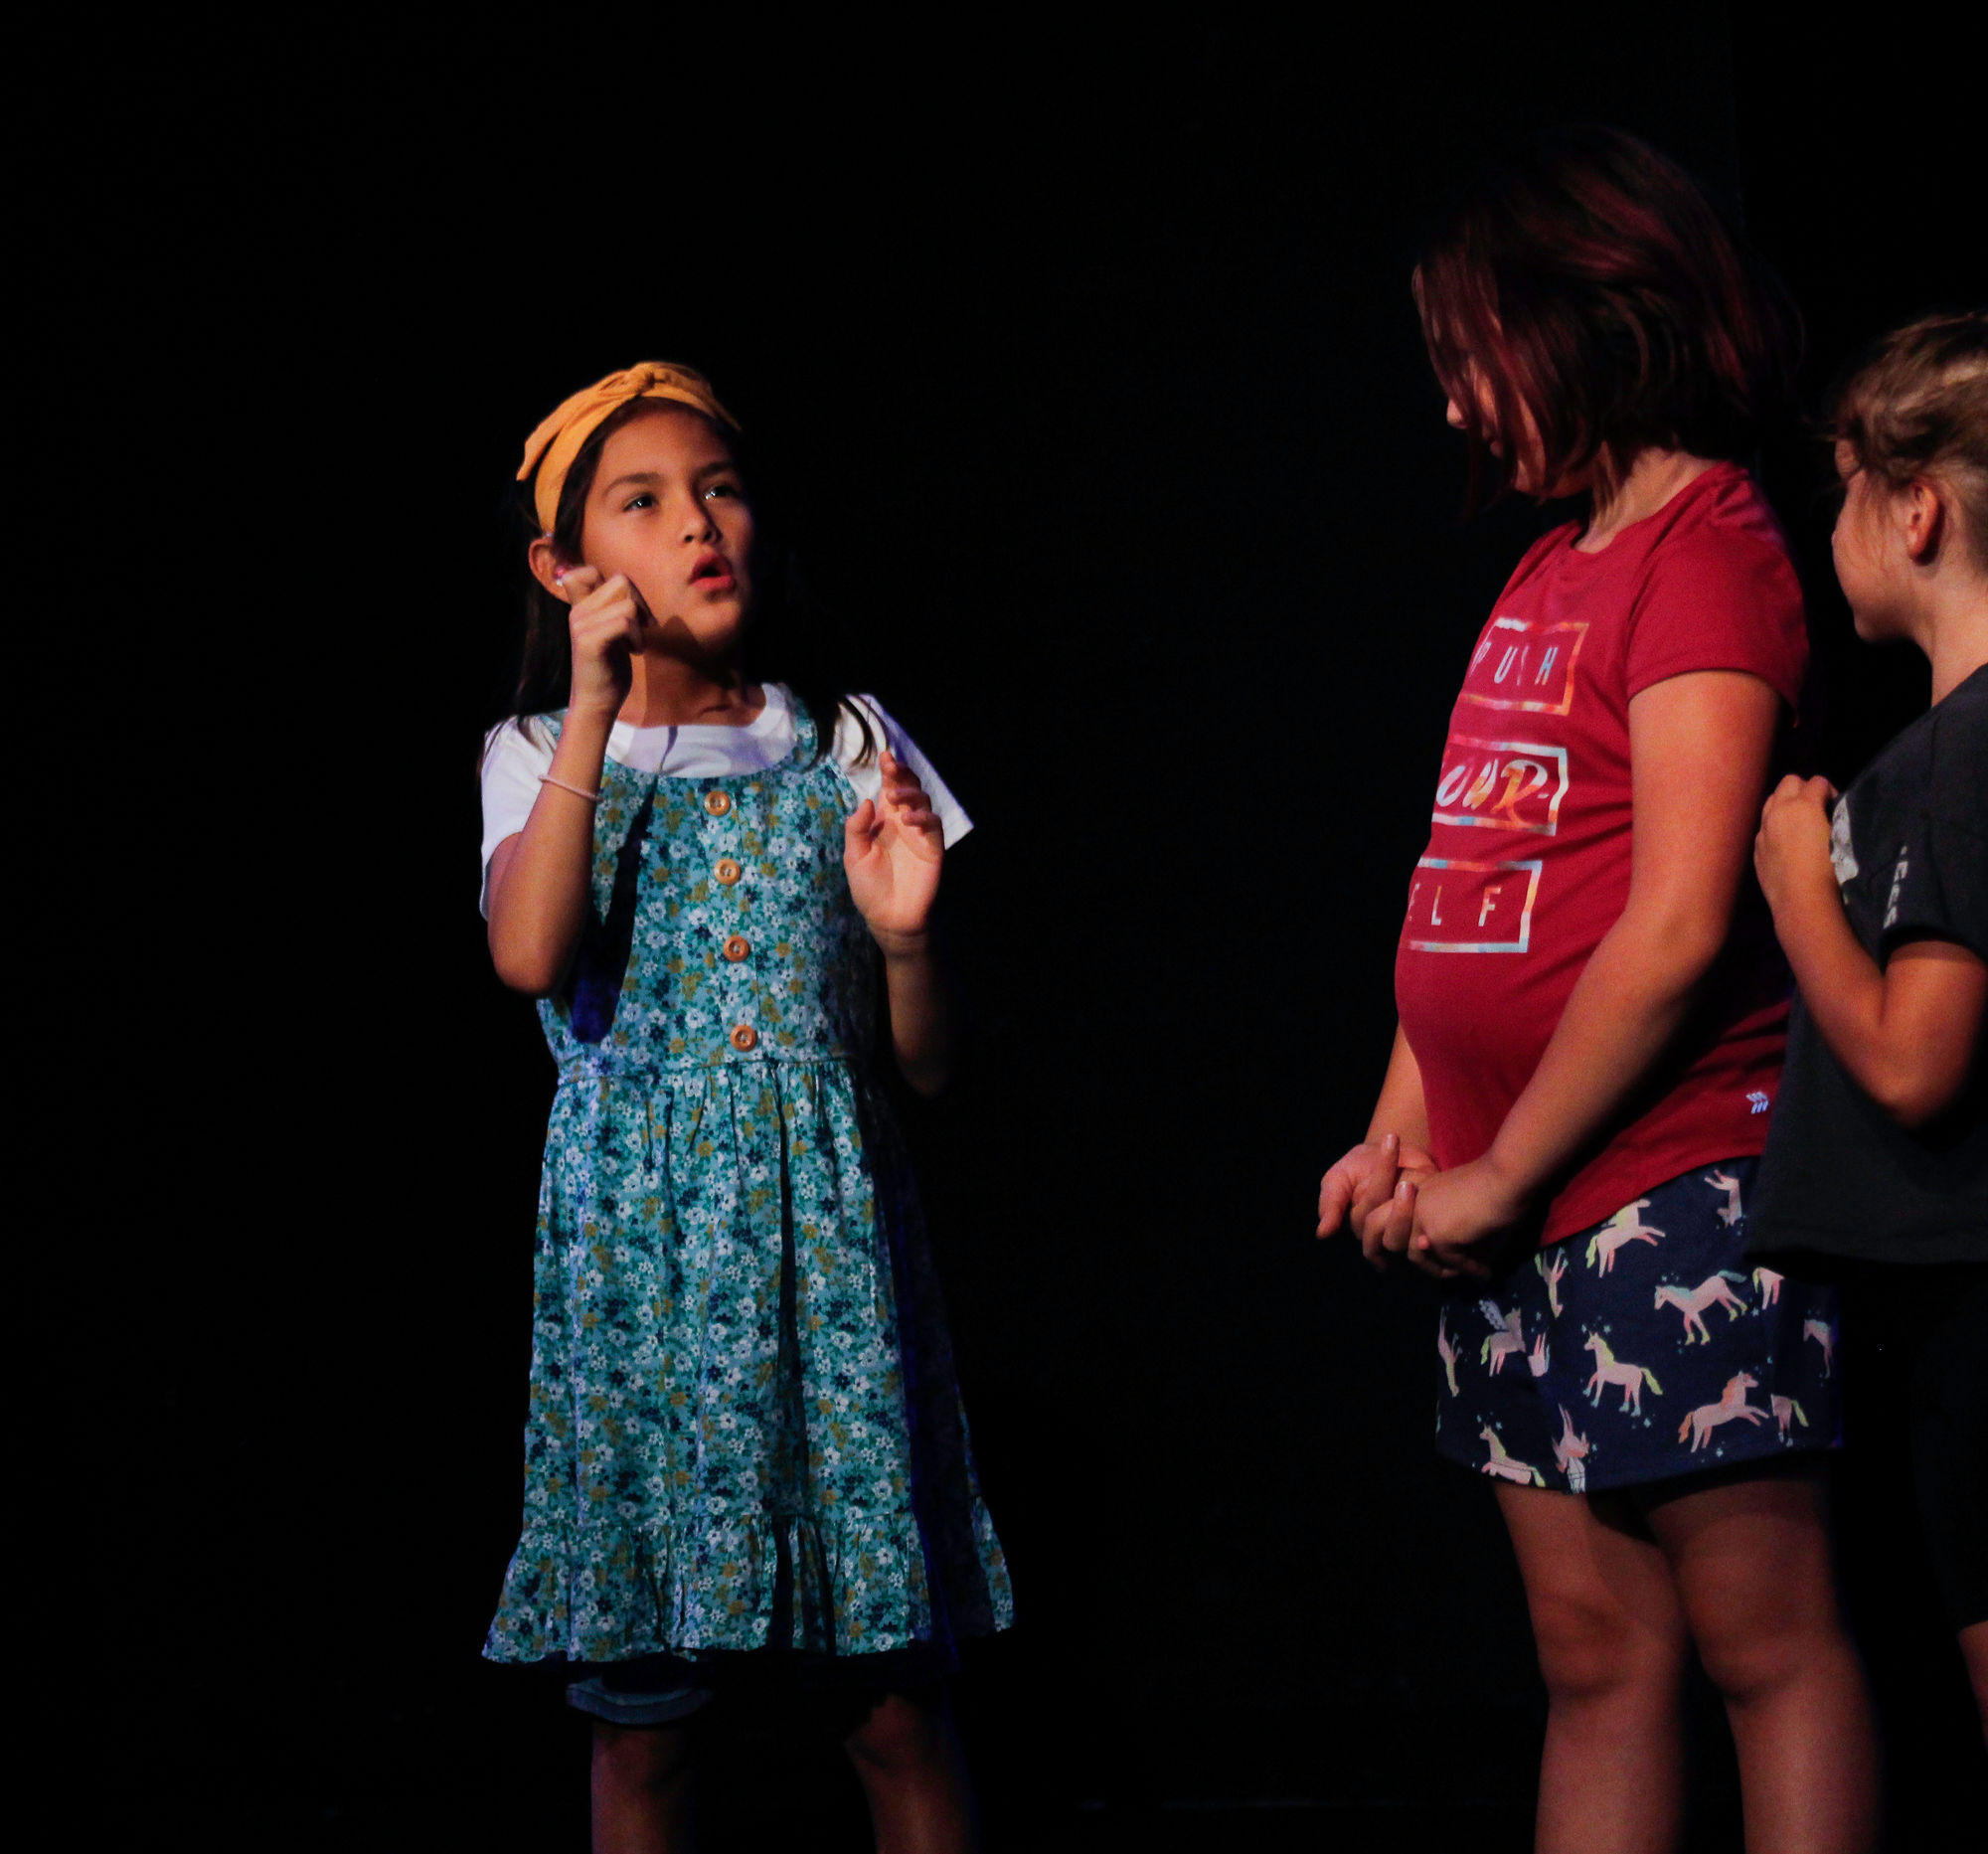 Students sign ASL while performing in Deaf theatre class